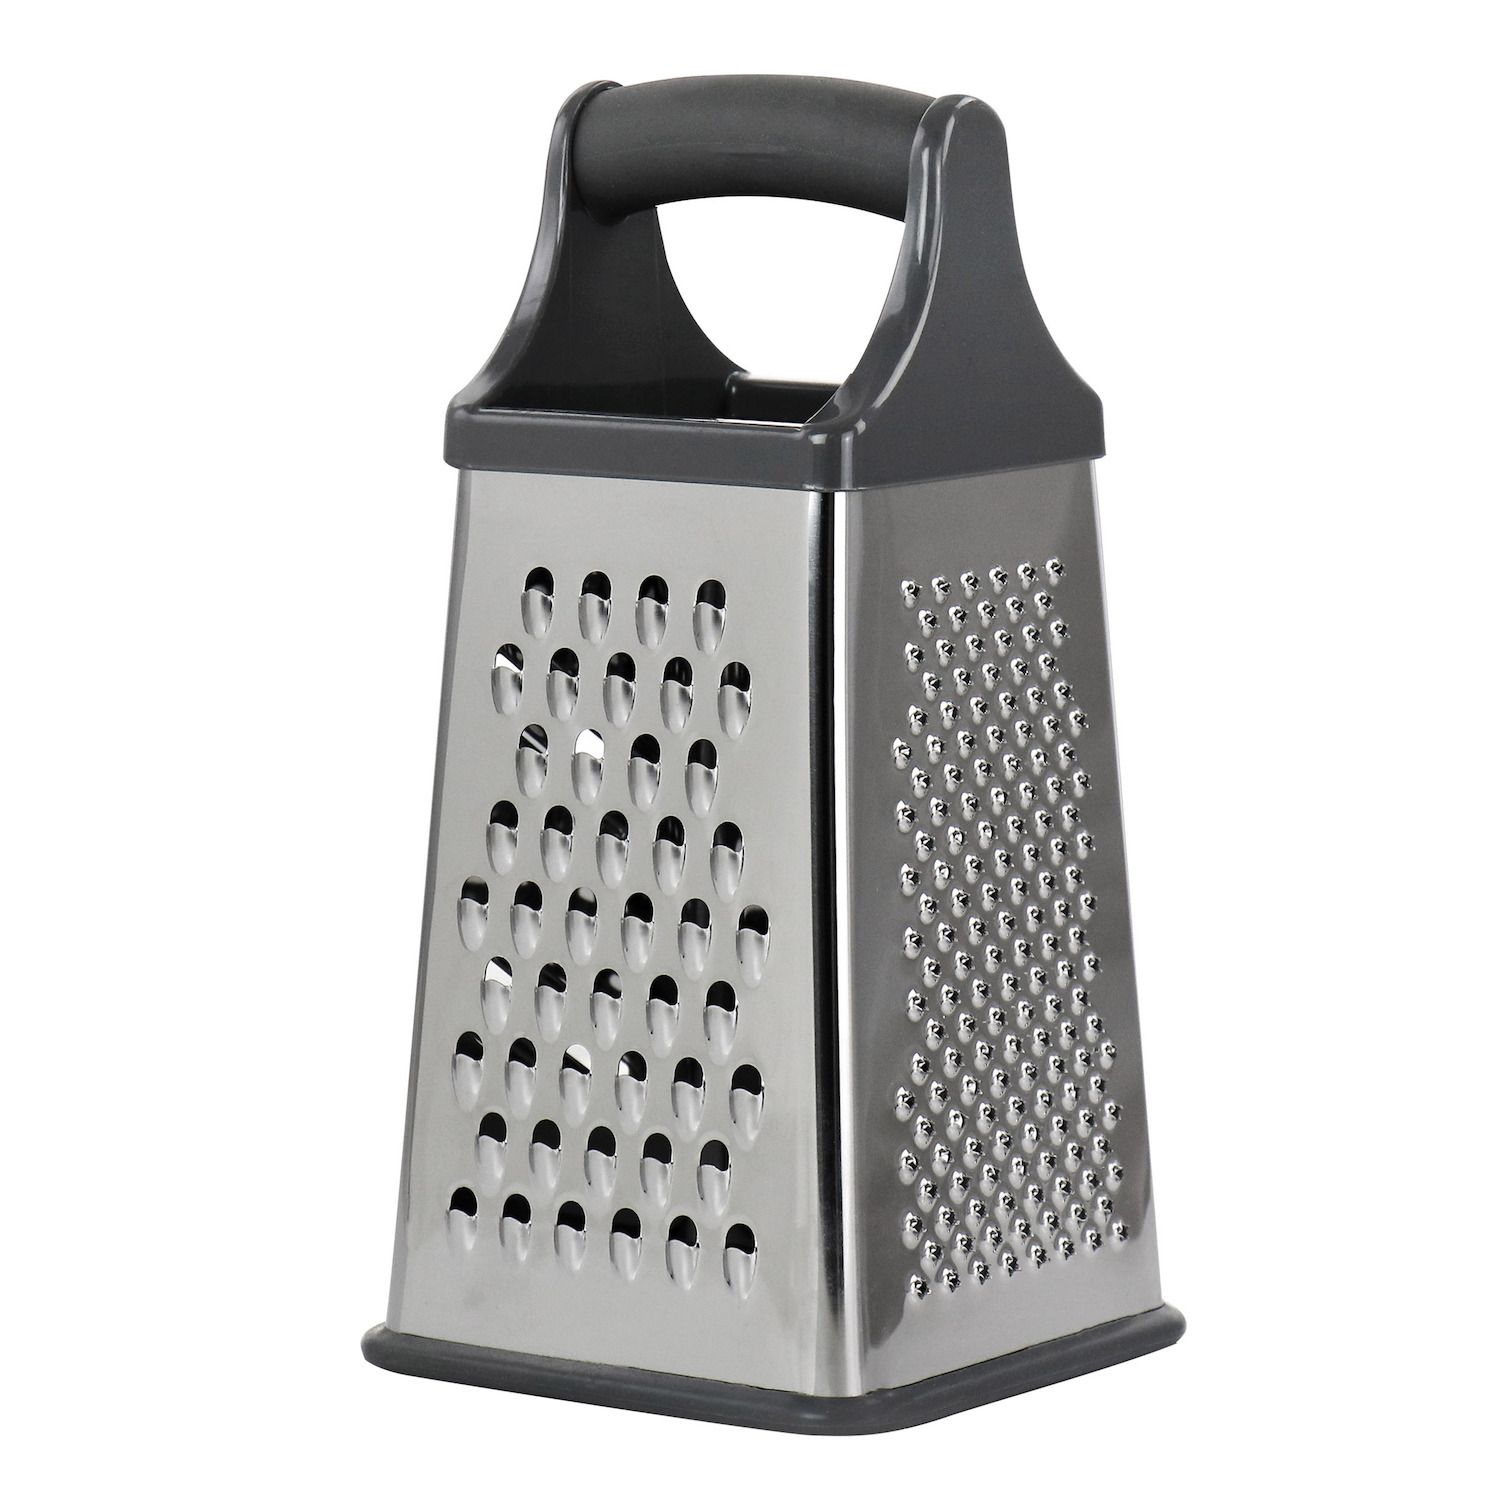 1pc Multifunctional Vegetable Cutter; Potato Shredded Grater; 3 Blades Or 6  Blades For Choose 11in*7.2in (Pink-Three Blades)